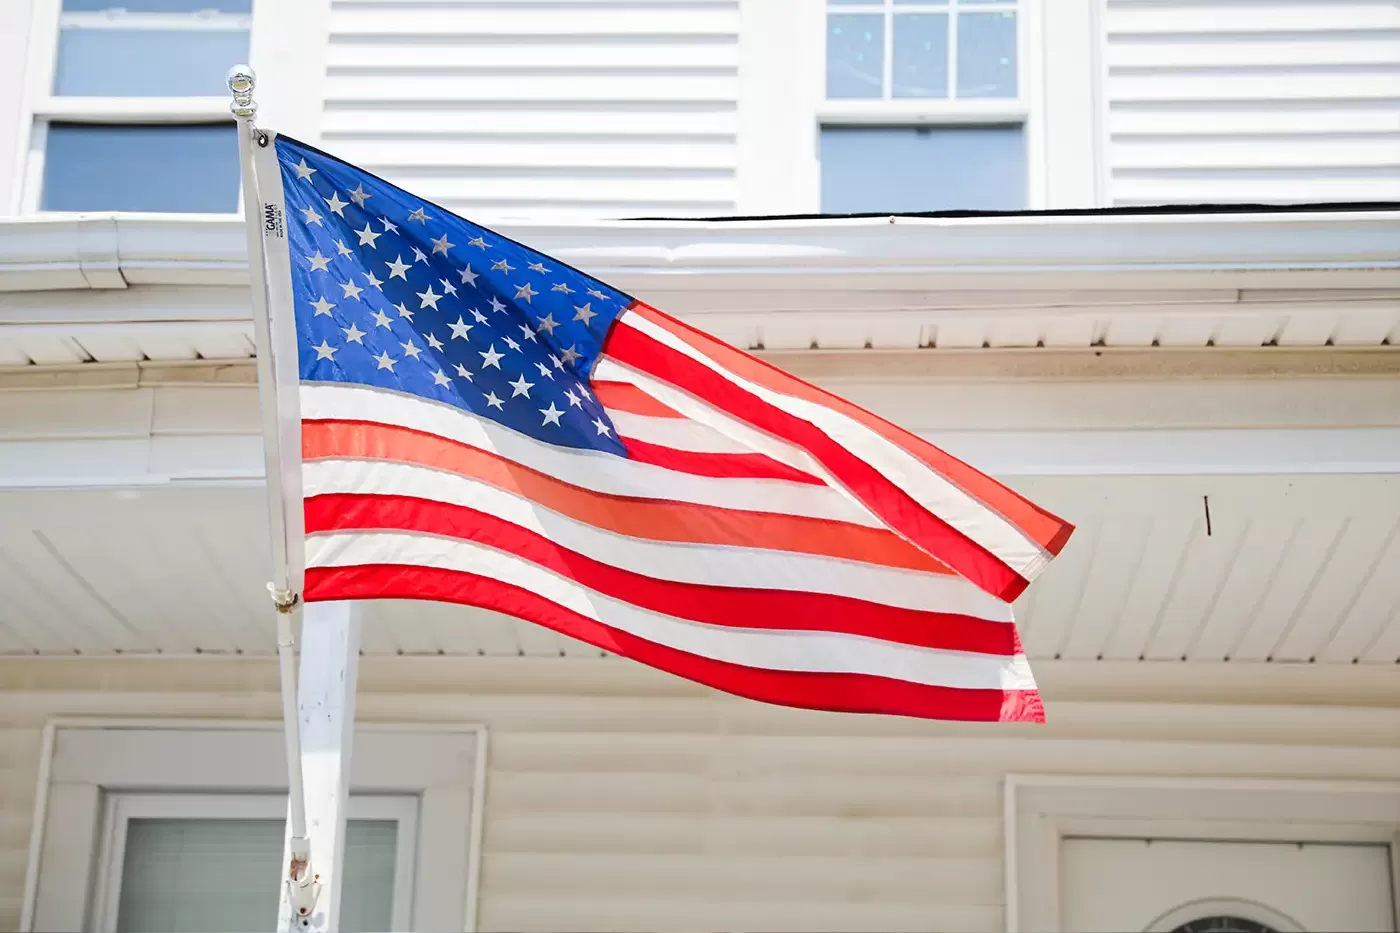 Photo of the American flag displayed in front of a house.